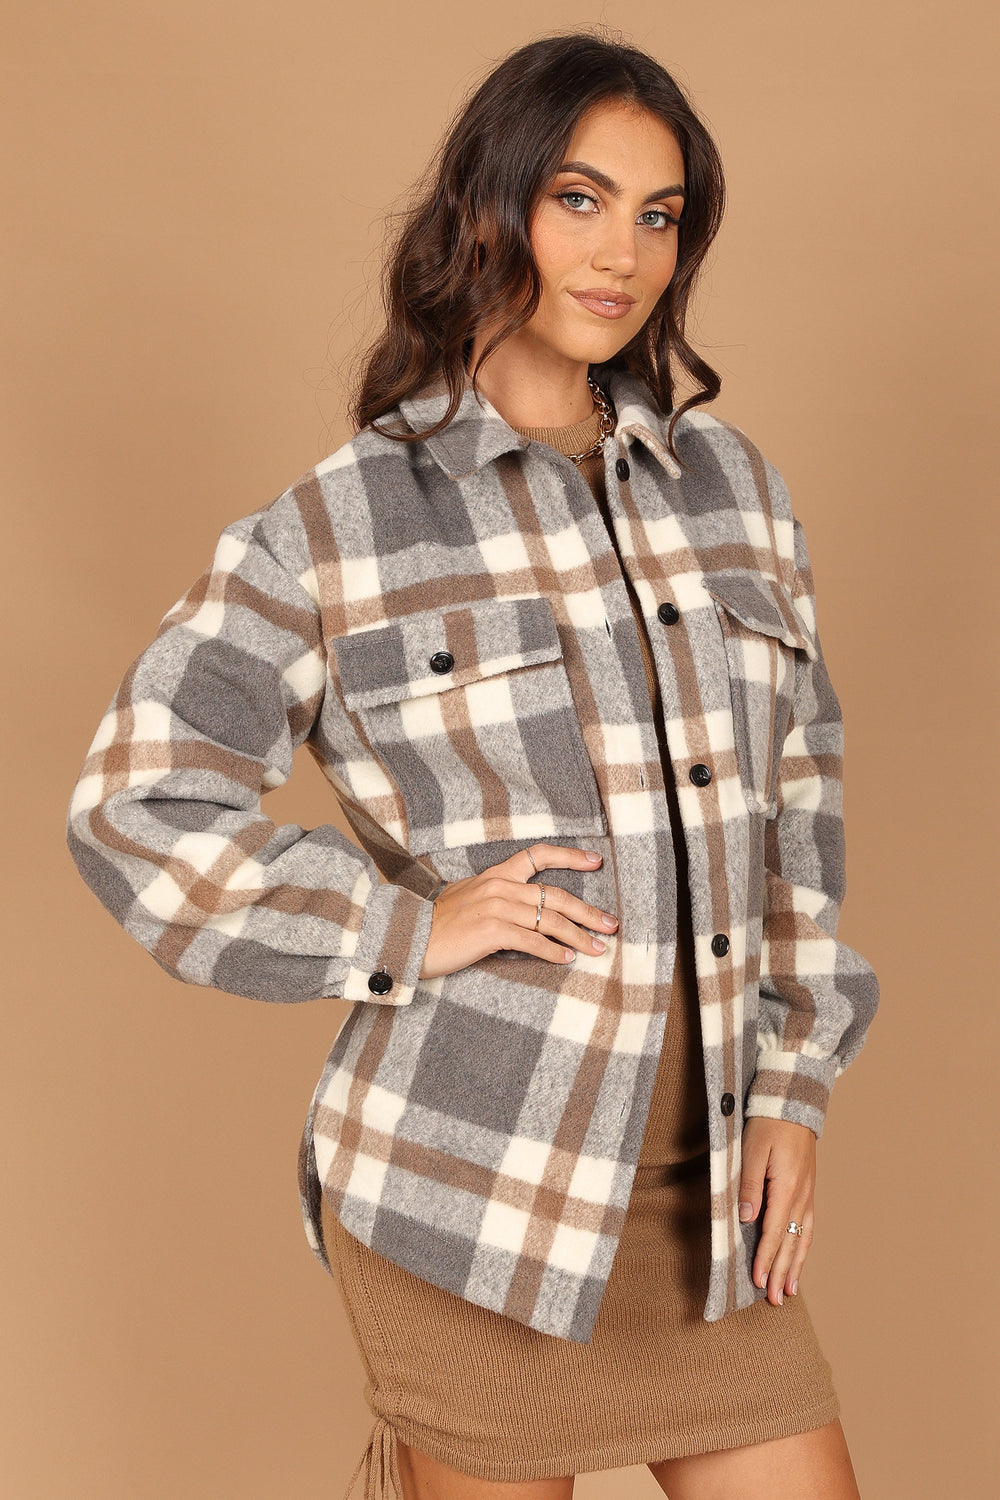 Petal and Pup USA Outerwear Alex Double-Breasted Pocket Shacket - Grey Check